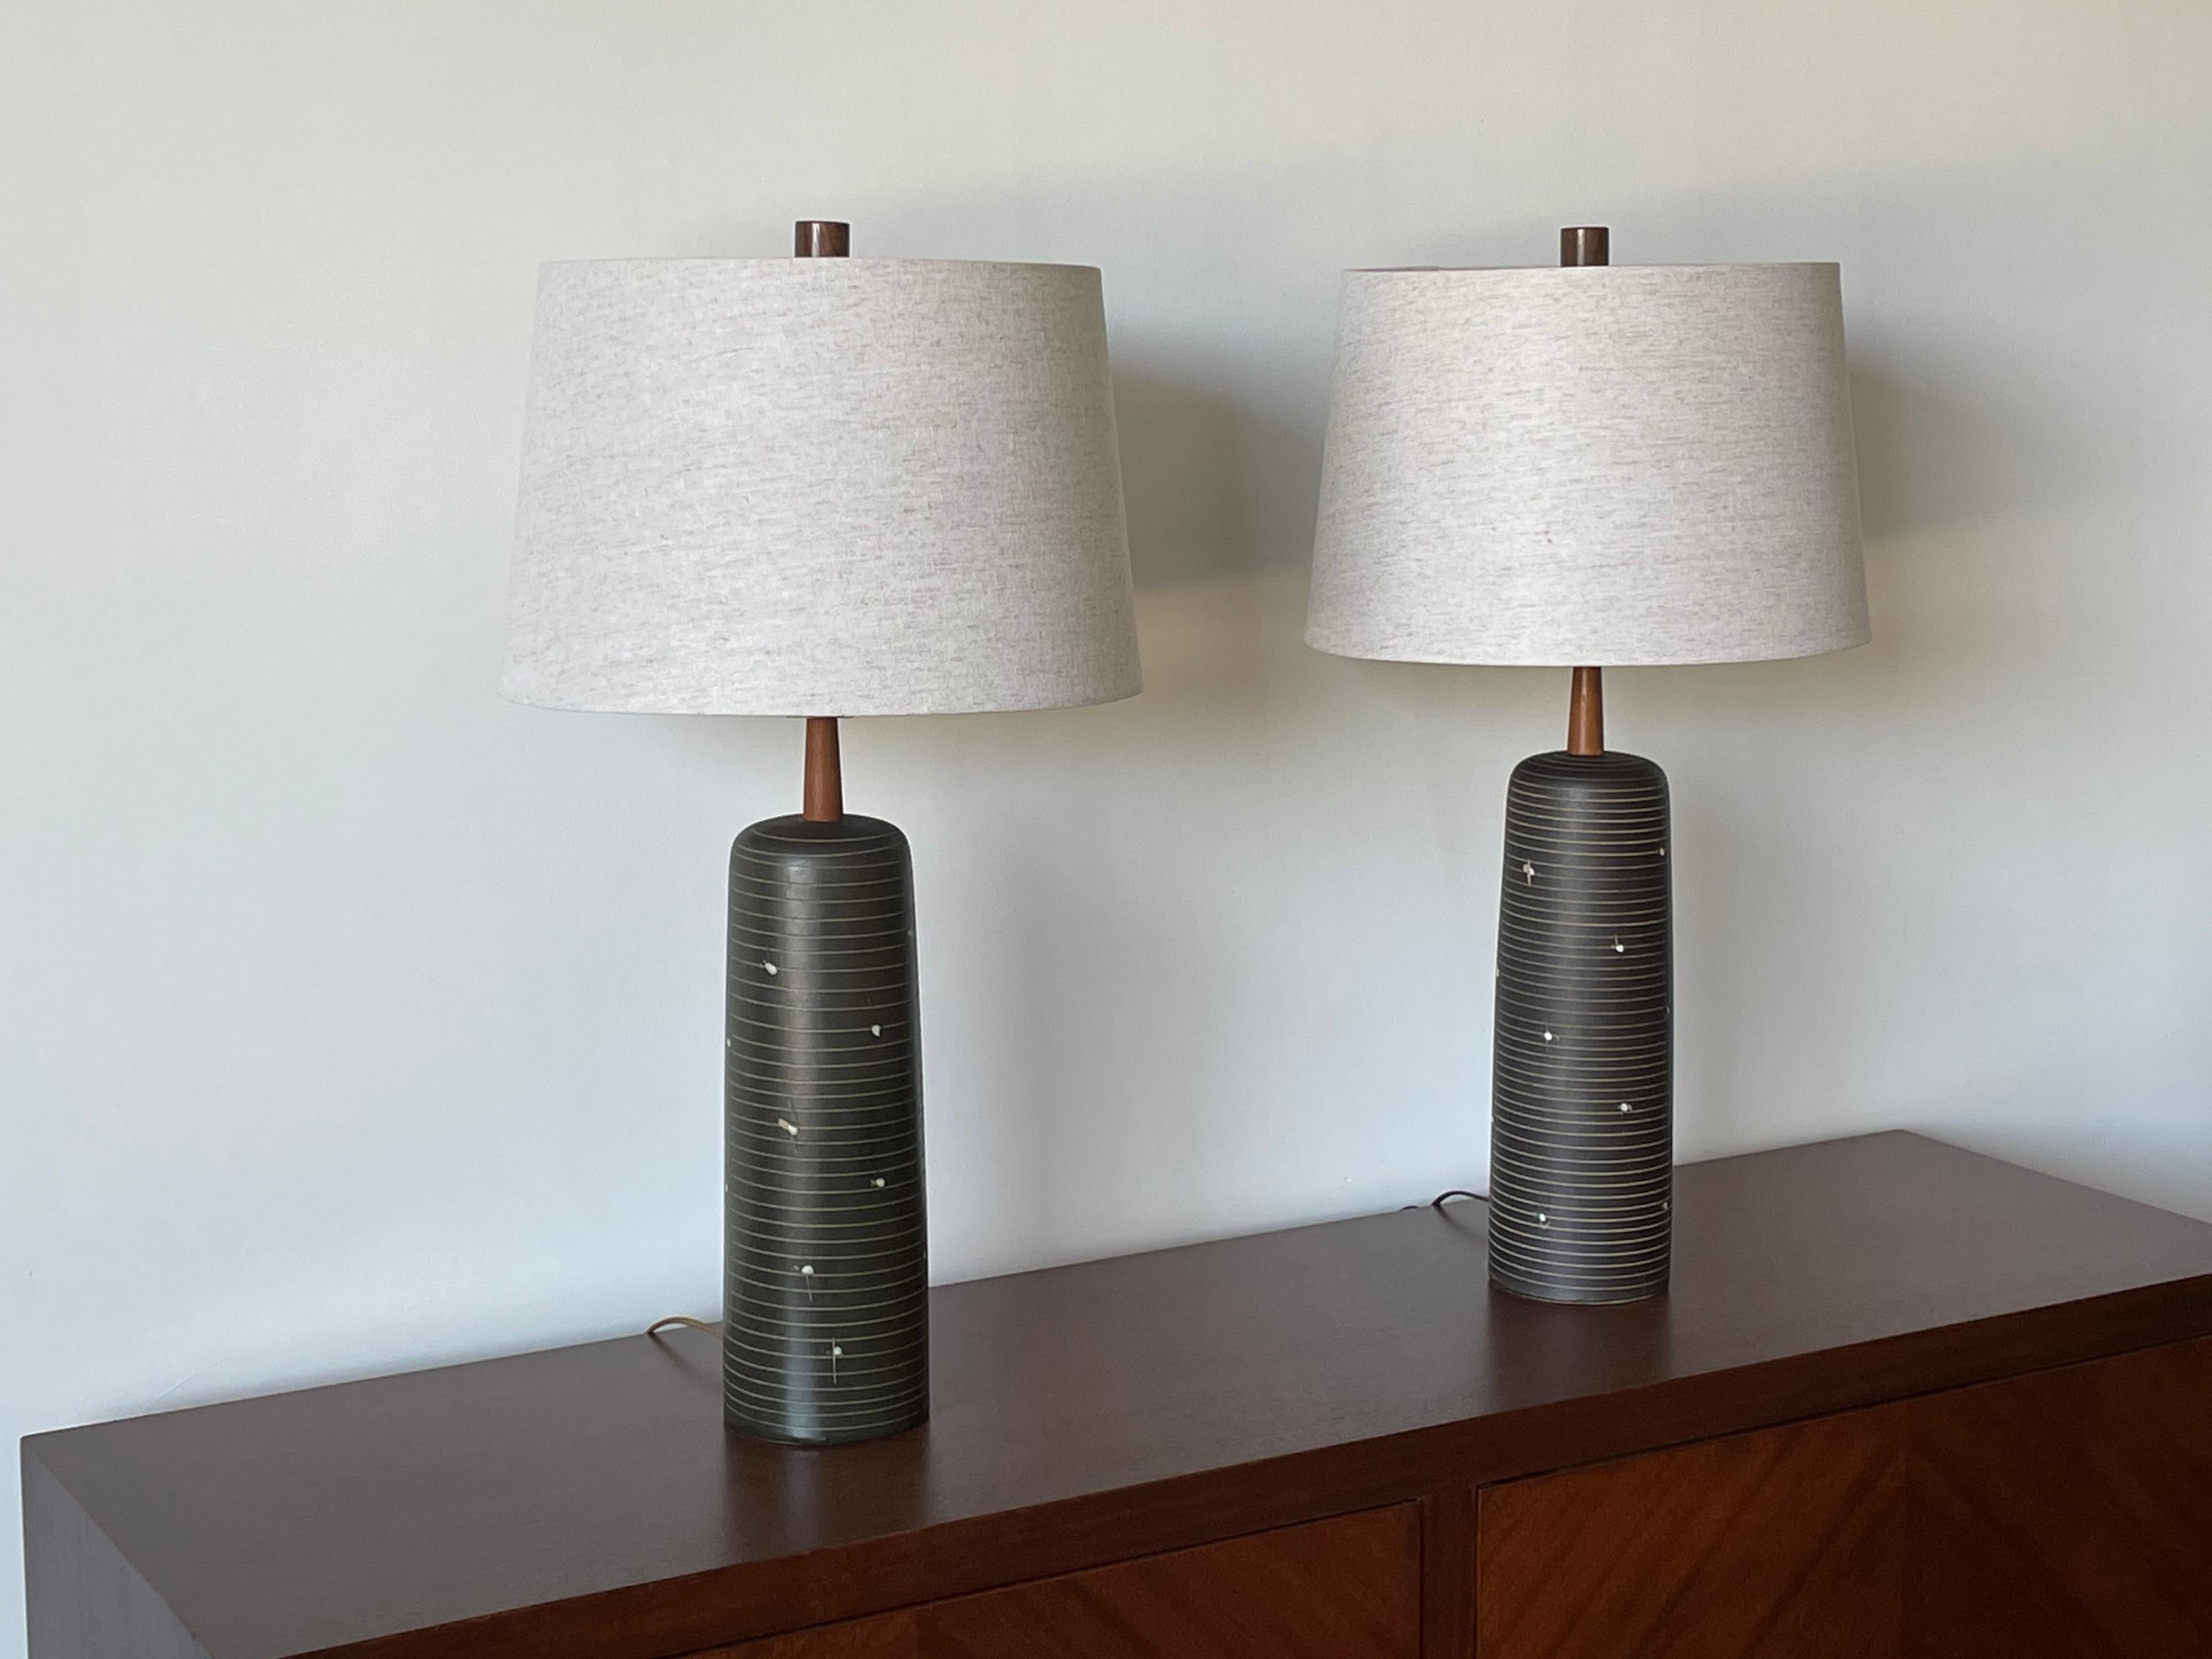 A pair of elegant lamps by famed ceramicist duo Jane and Gordon Martz for Marshall Studios. Features a black matte glaze with incised swirl and detail. Please note that lamps are not an exact match. There is a very slightly color and glaze